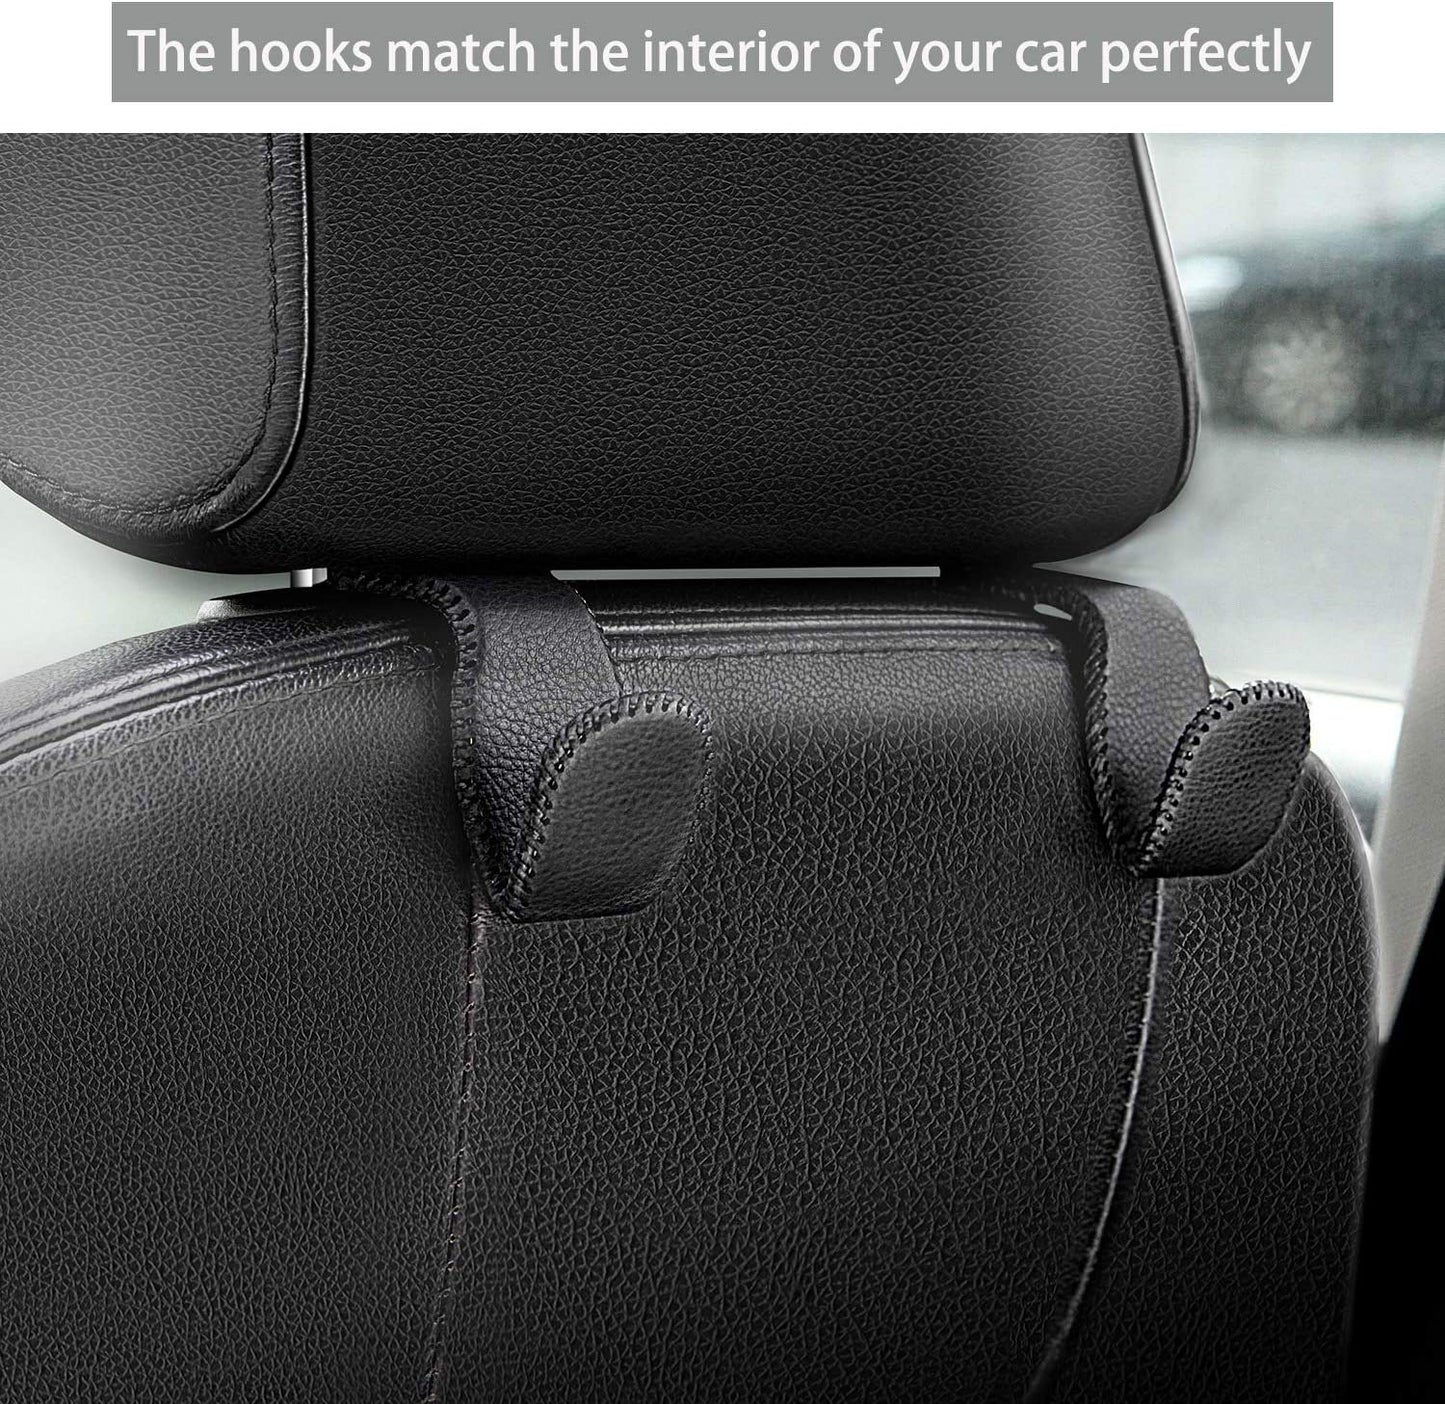 AMVOYOA Car Headrest Hook, Leather Vehicle Back Seat Hanger Storage for Purse Groceries Bag and More, Black&Red, Pack of 2